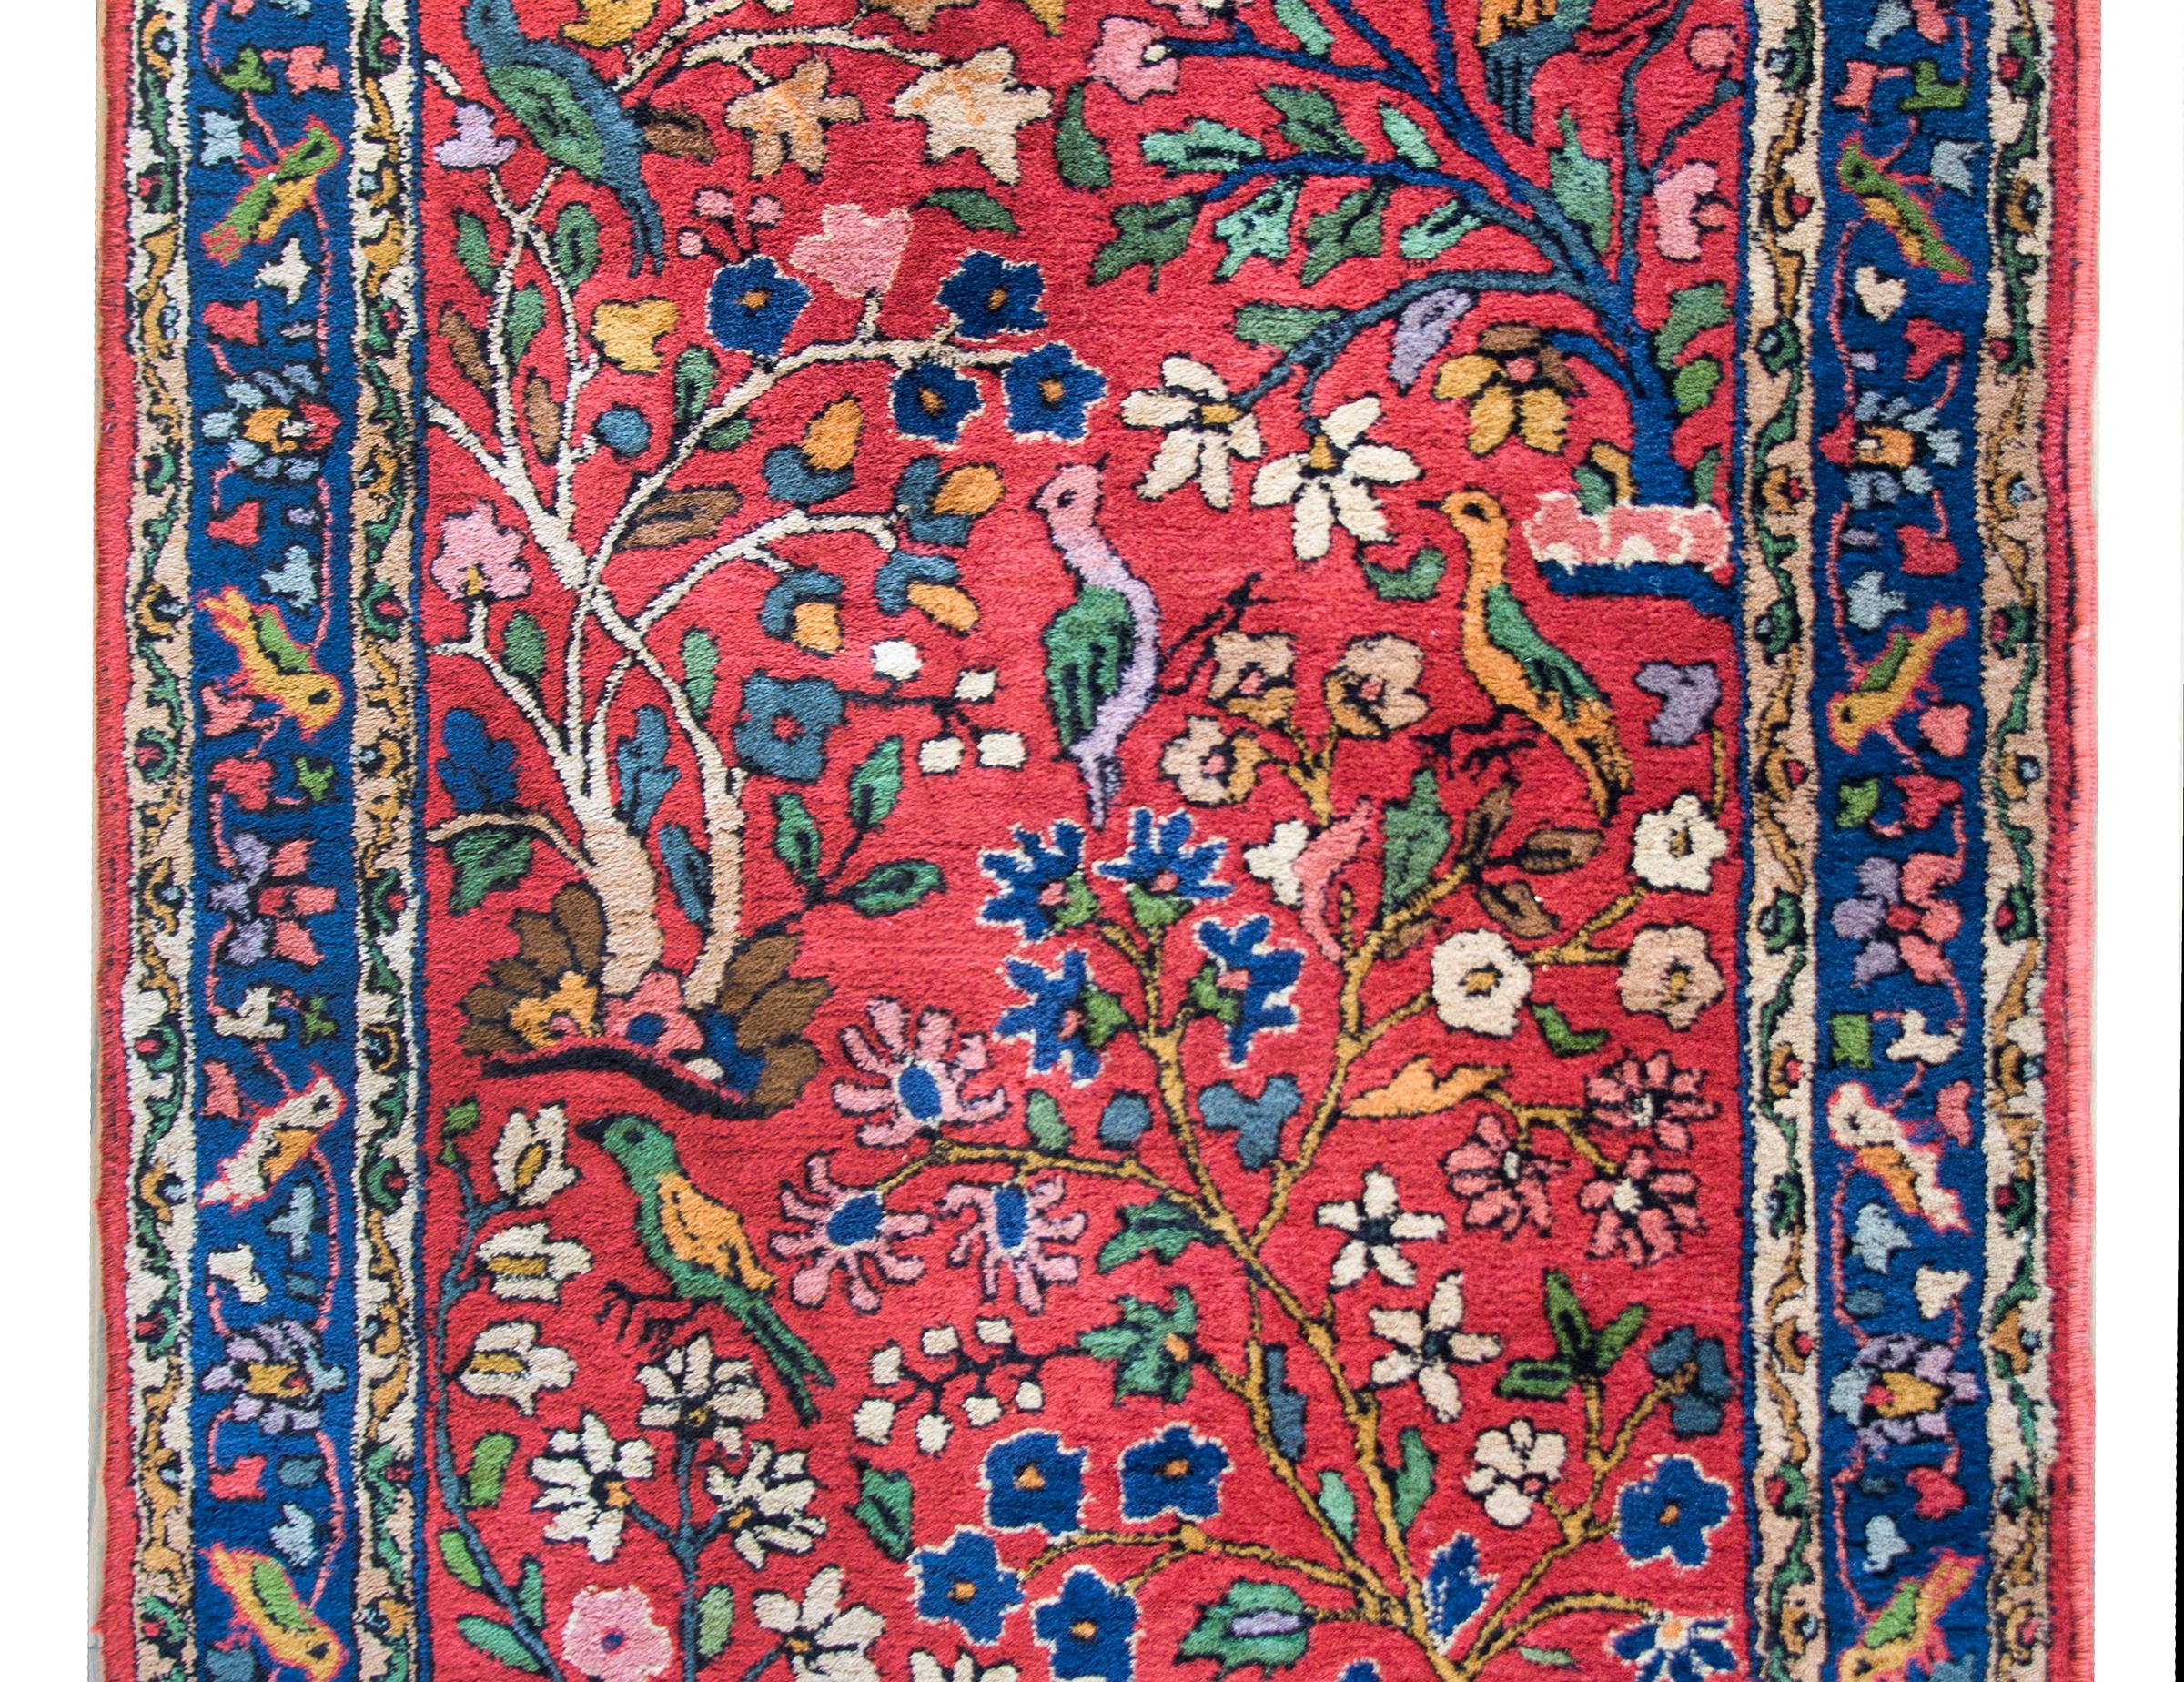 A playful mid-20th century German Tetex rug with an all-over tree-of-life pattern with myriad flowering trees with multi-colored flowers and leaves, and several birds, all set against a crimson background, and surrounded by a wide border with